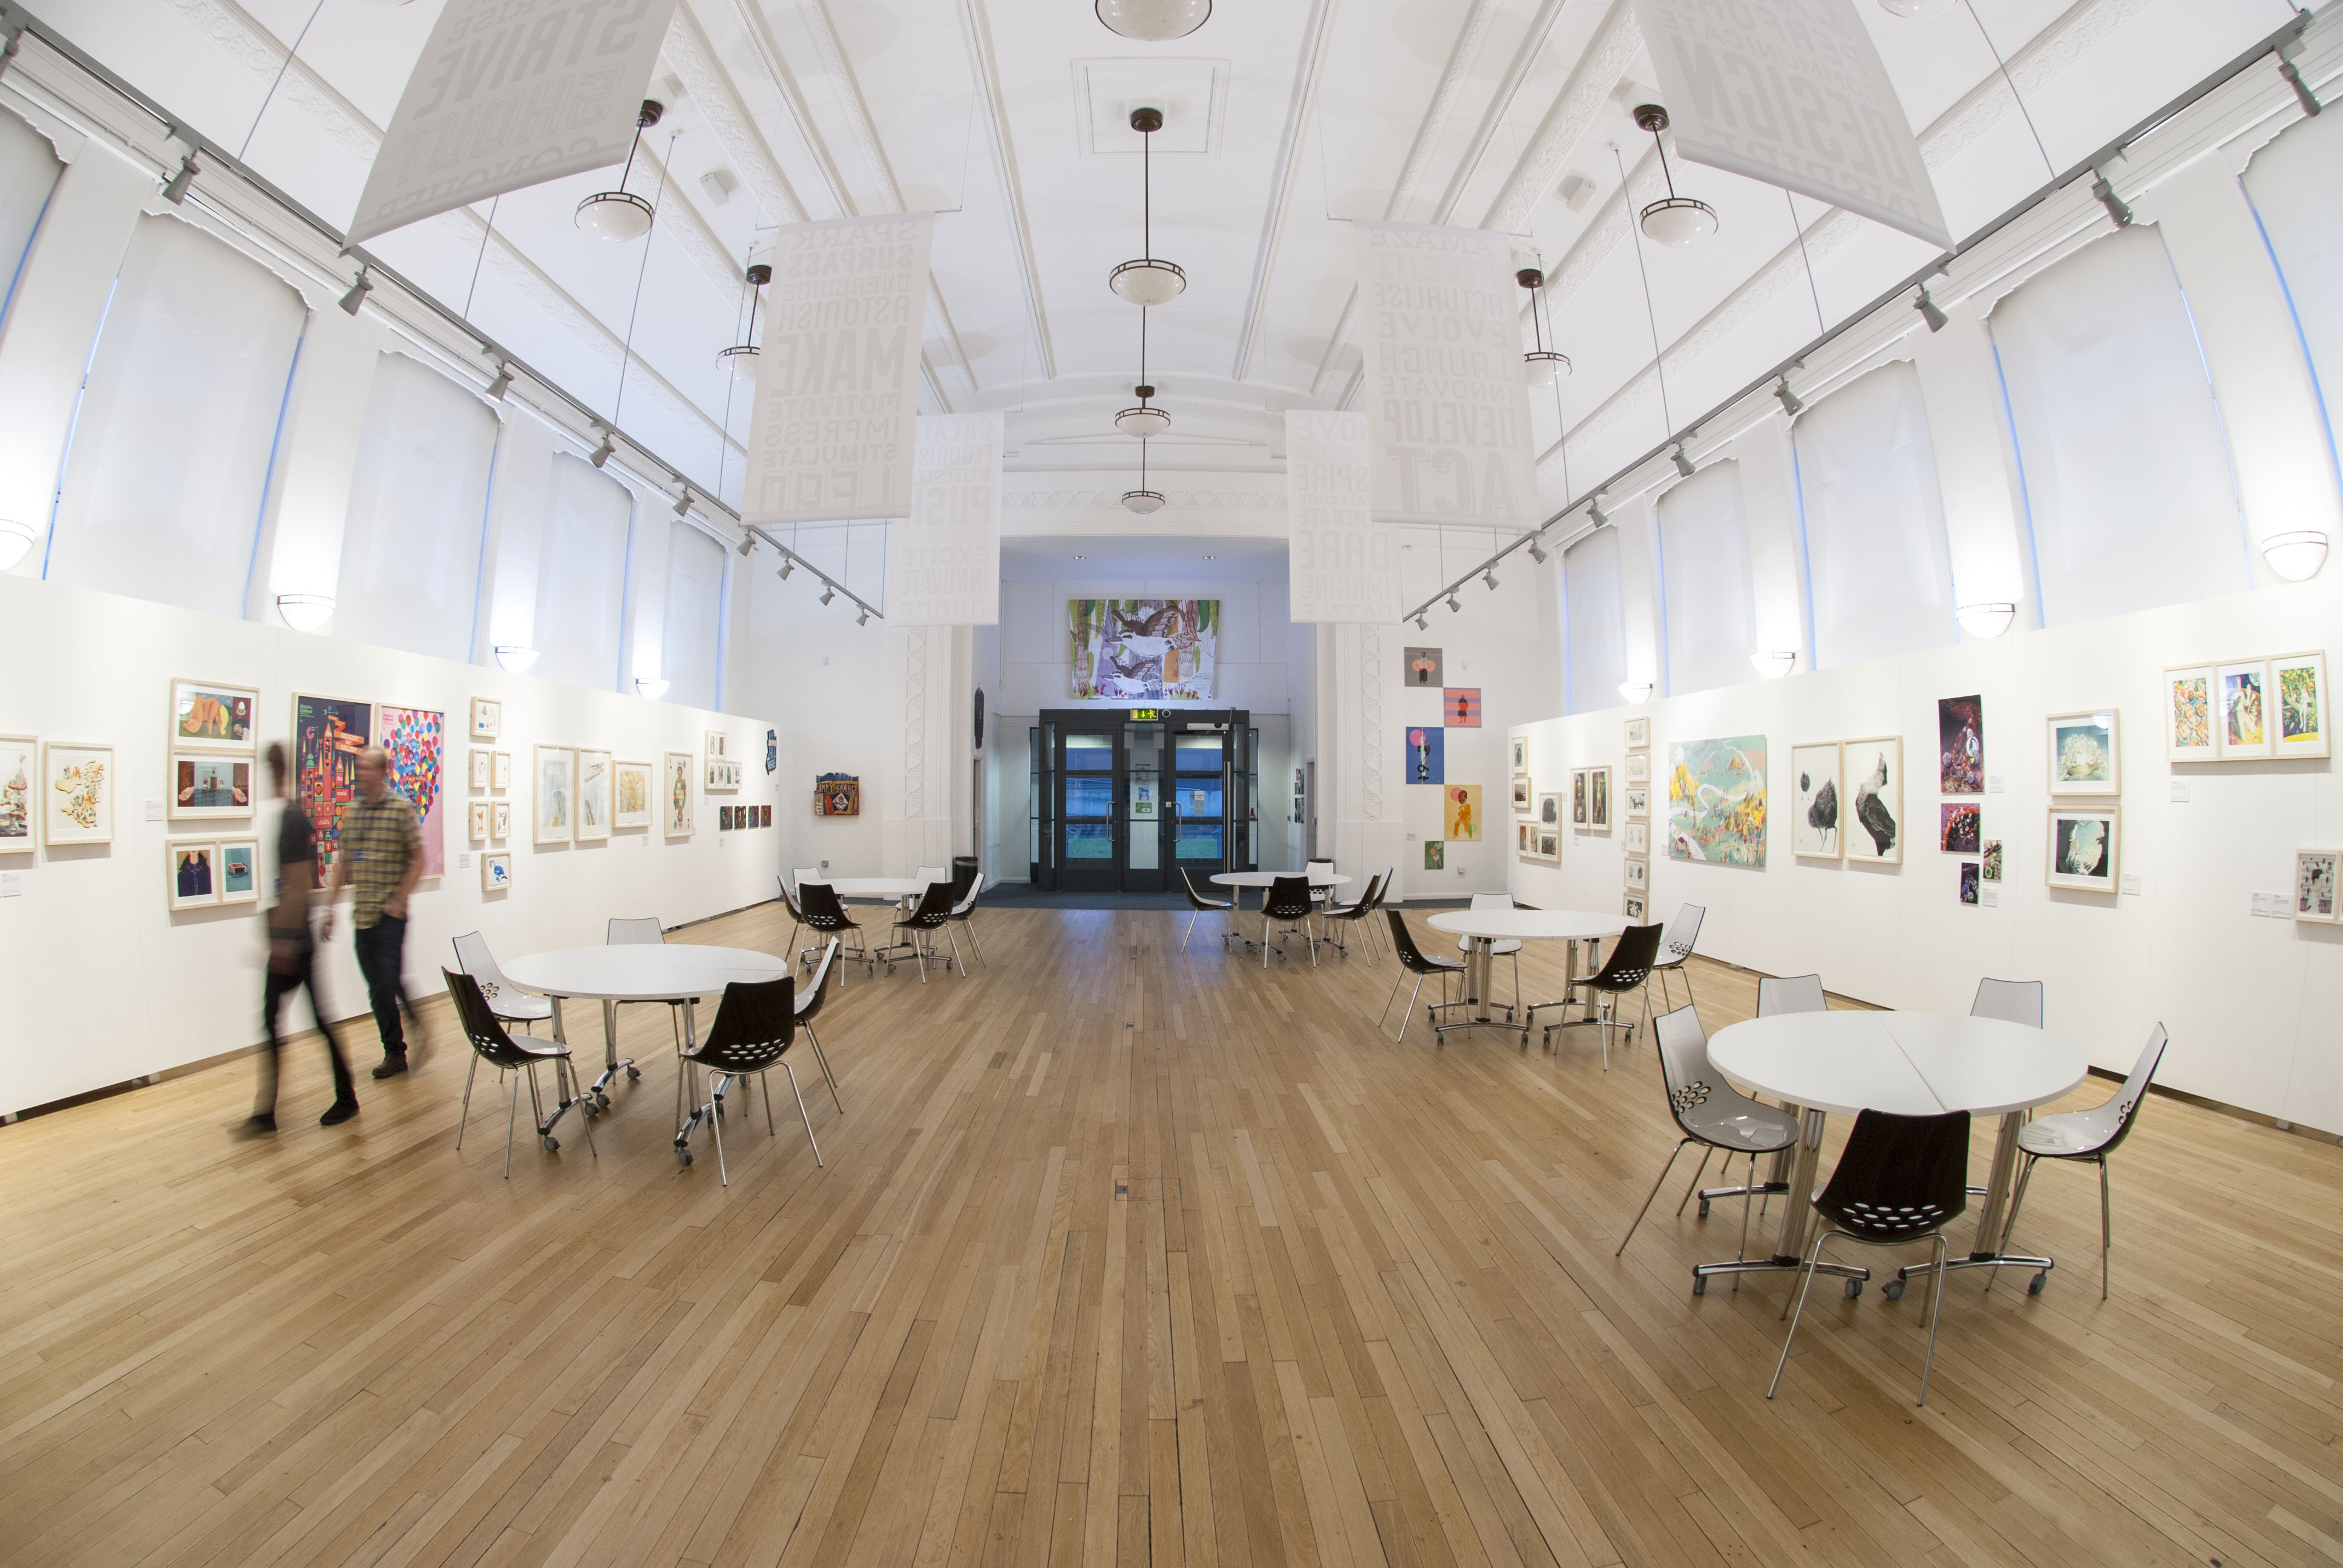 Image showing the interior of The Gallery at Blackpool School of Arts